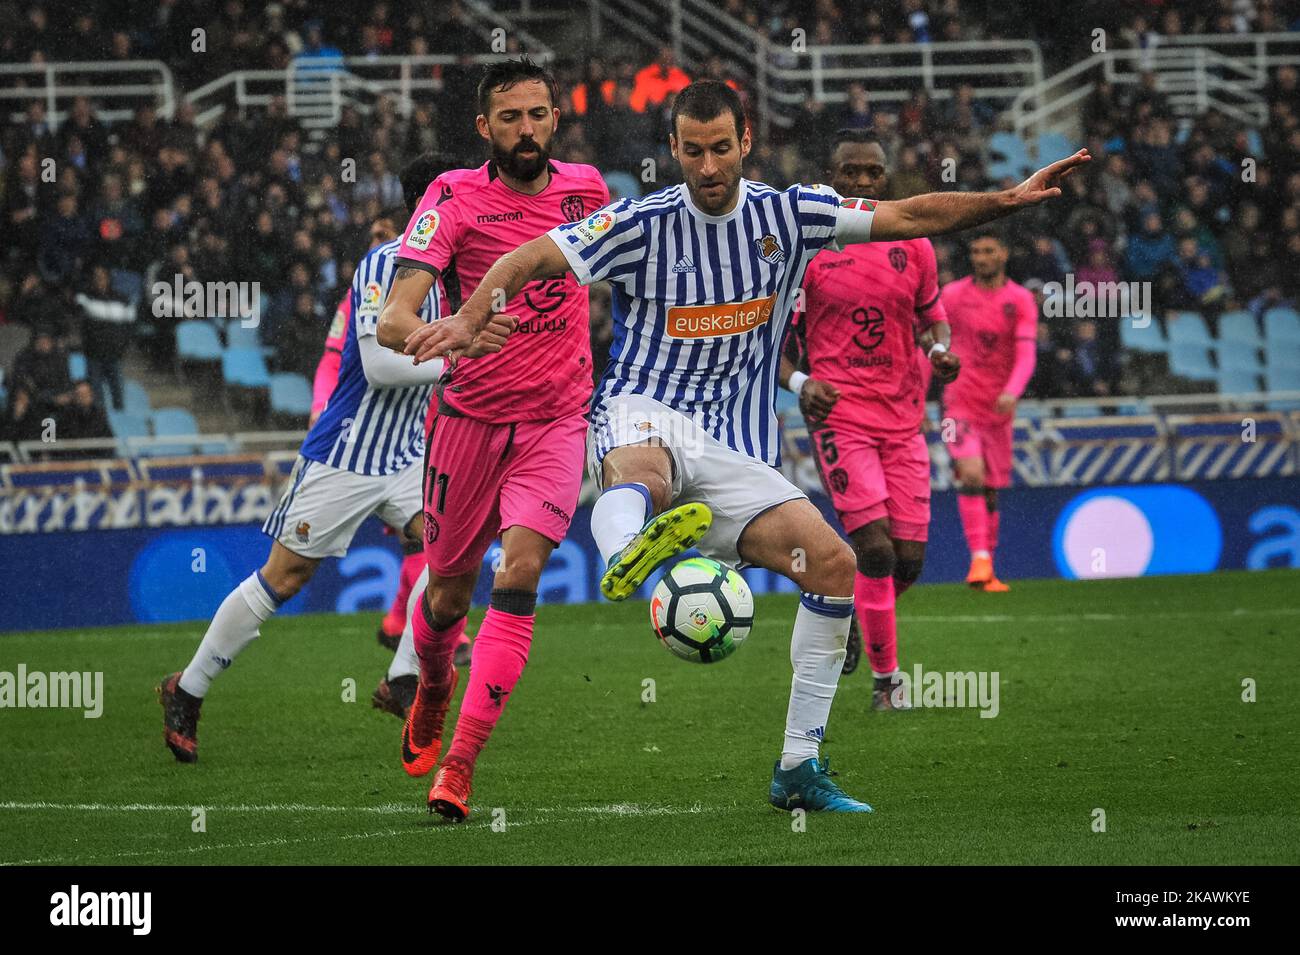 Agirretxe of Real Sociedad duels for the ball with Morales of Levante during the Spanish league football match between Real Sociedad and Levante at the Anoeta Stadium on 18 February 2018 in San Sebastian, Spain (Photo by Jose Ignacio Unanue/NurPhoto) Stock Photo